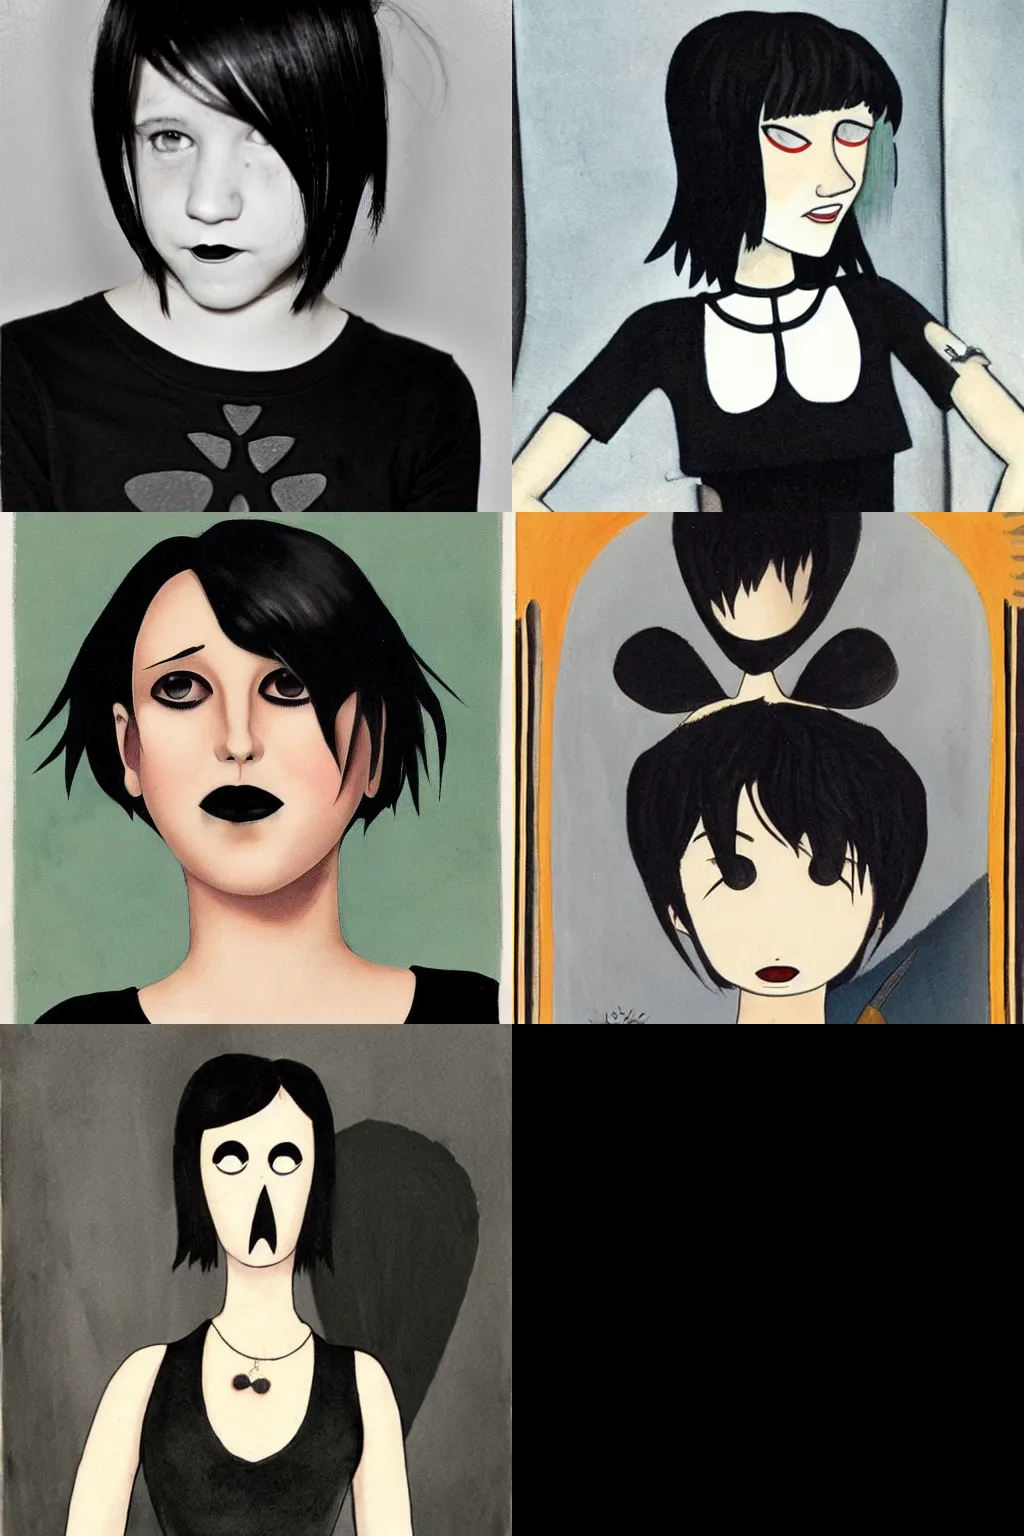 Prompt: an emo by charles addams. her hair is dark brown and cut into a short, messy pixie cut. she has a slightly rounded face, with a pointed chin, large entirely - black eyes, and a small nose. she is wearing a black tank top, a black leather jacket, a black knee - length skirt, a black choker, and black leather boots.